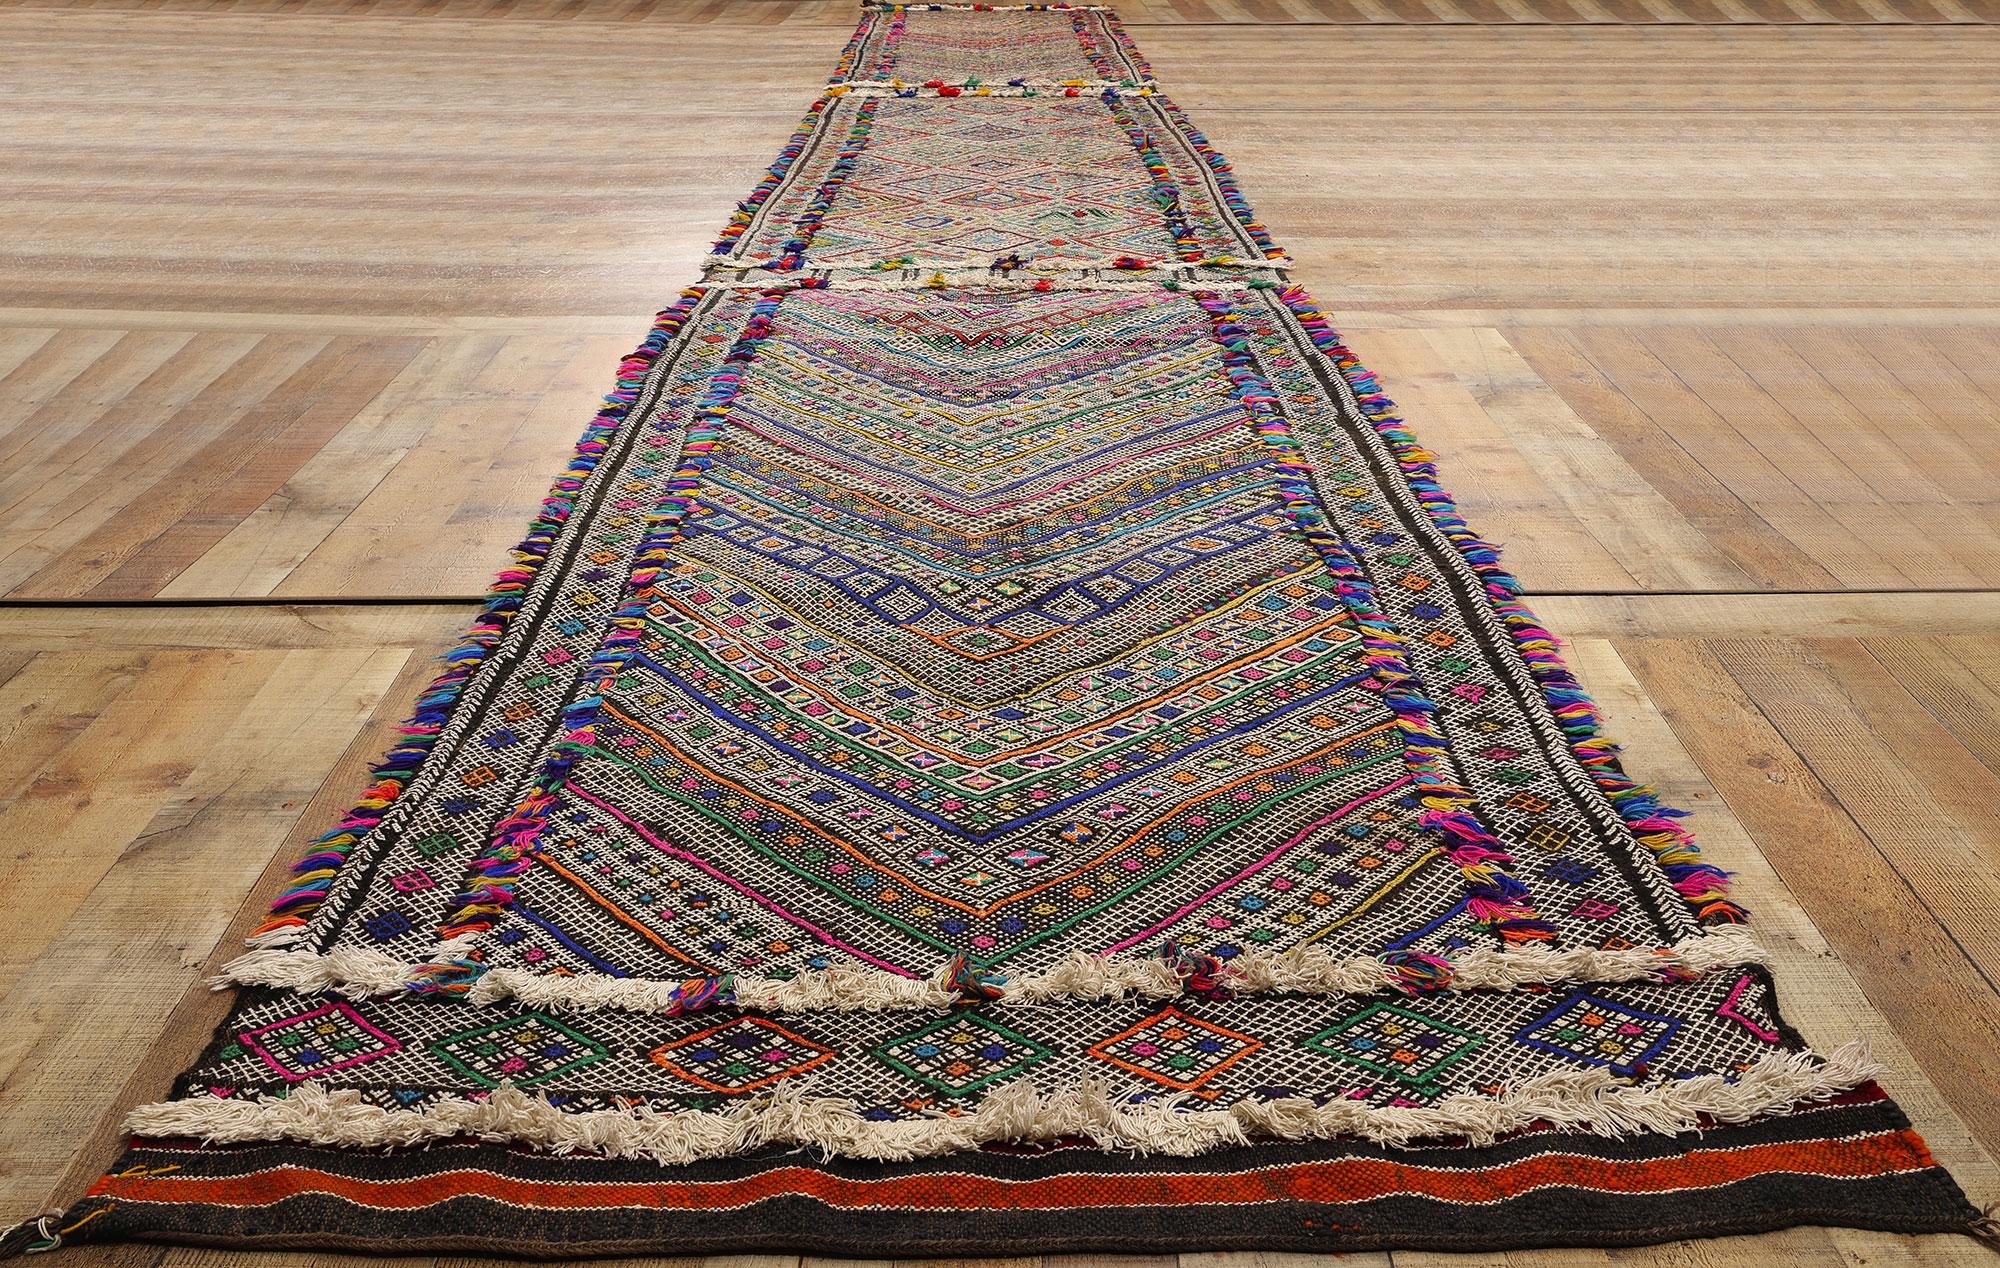 Midcentury Bohemian Vintage Moroccan Zemmour Kilim Berber Rug, 03'08 x 26'02 In Good Condition For Sale In Dallas, TX